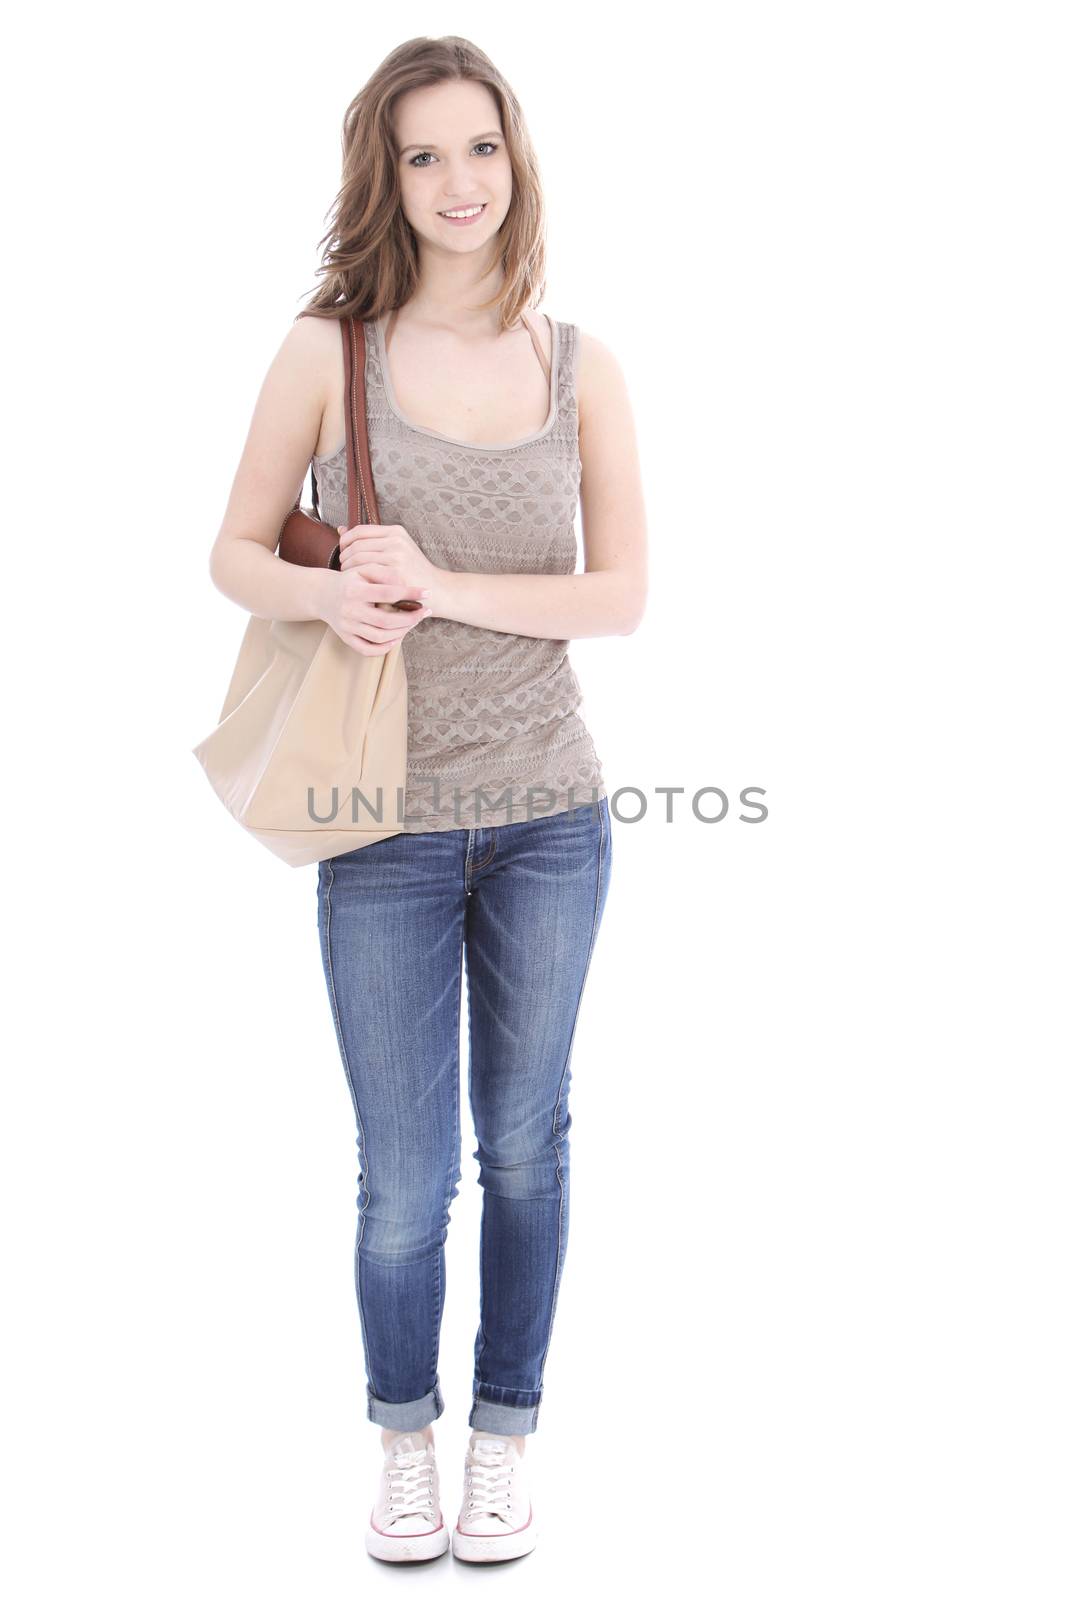 Trendy young female student wearing jeans and a pretty summer top and carrying a large cloth bag over her shoulder, full length portrait on white